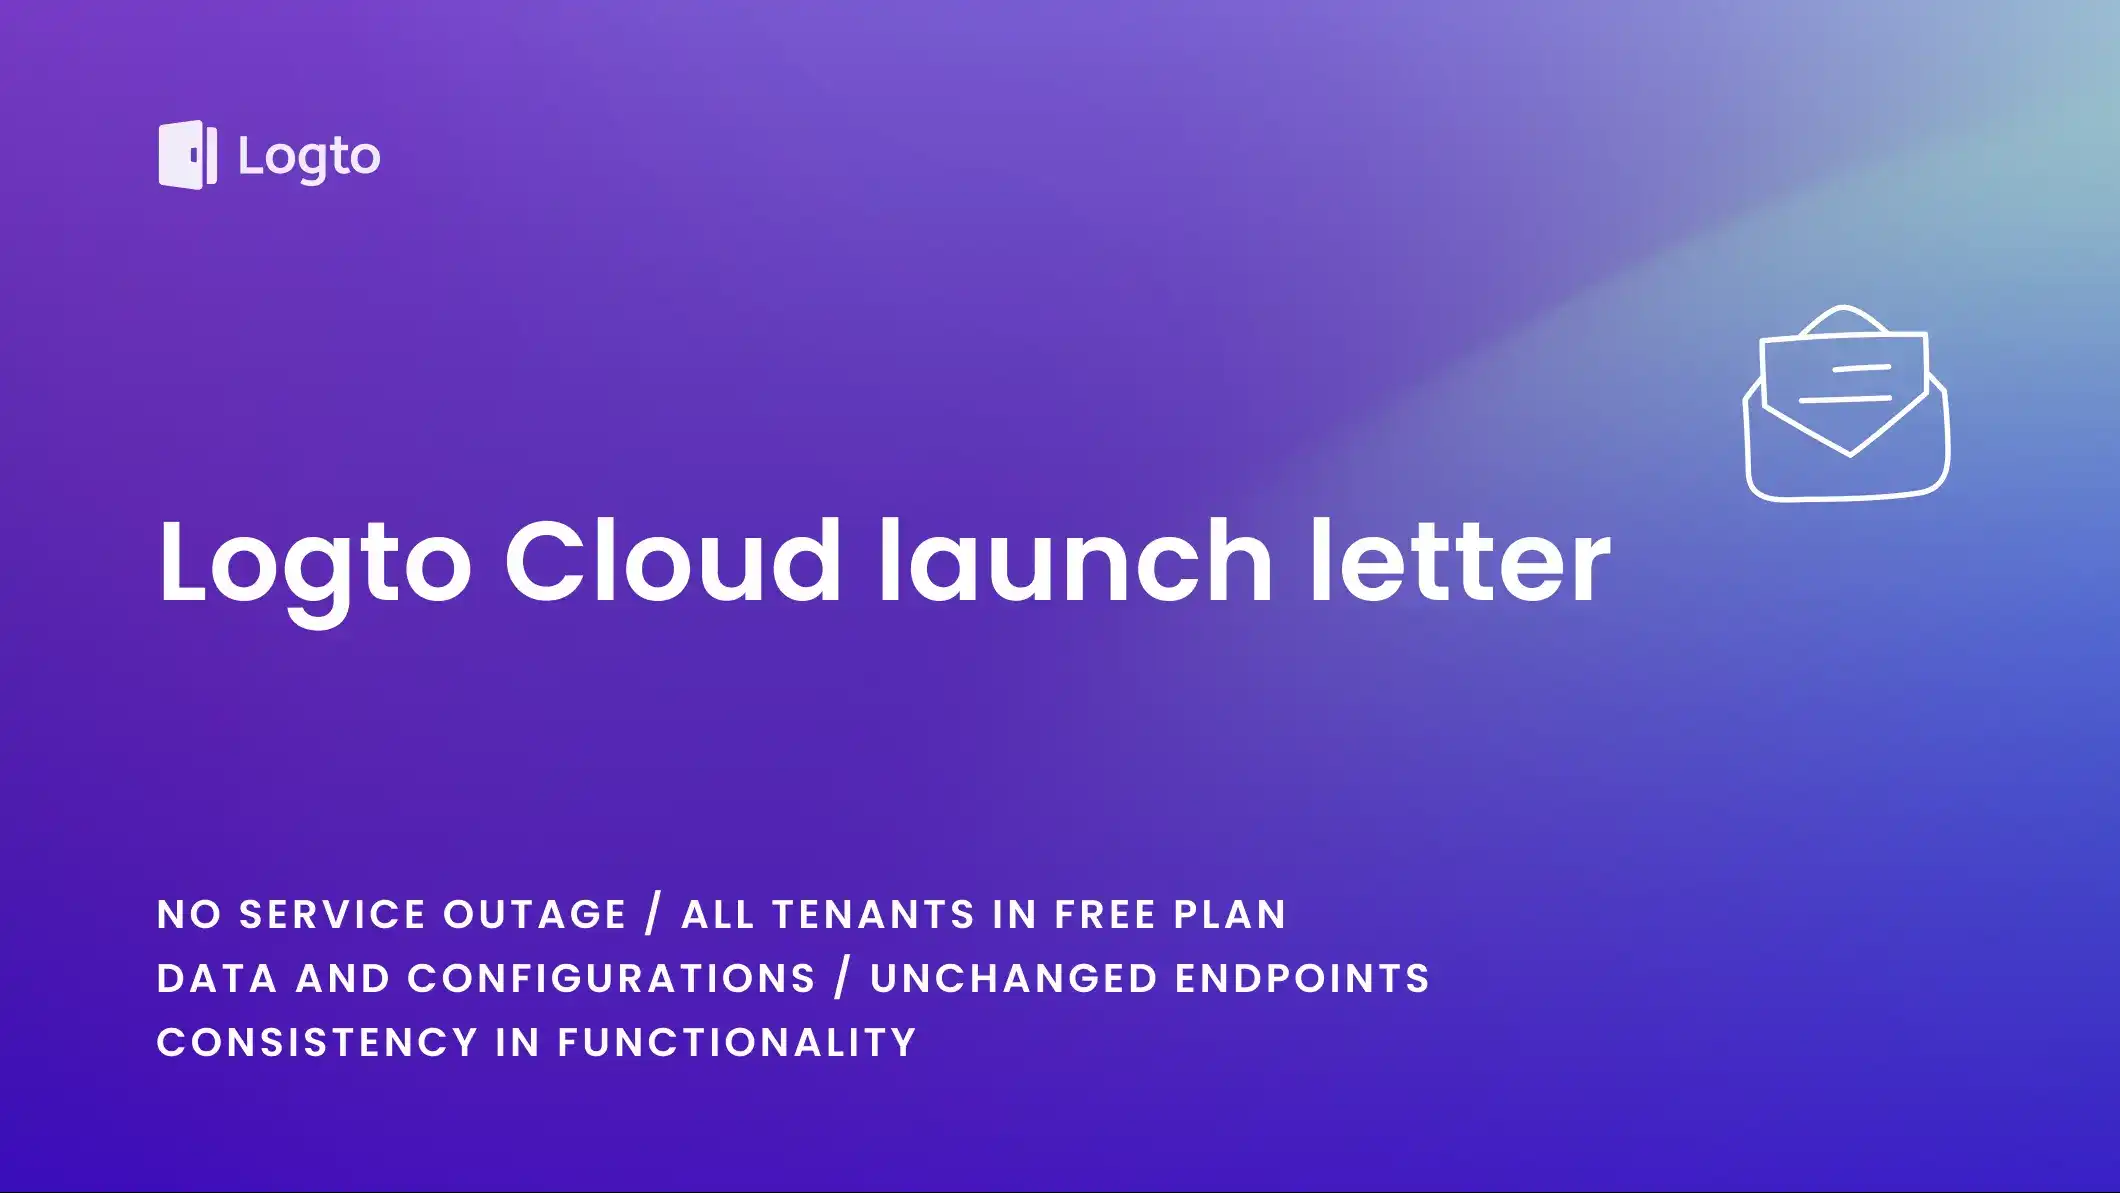 Logto Cloud launch letter for preview users